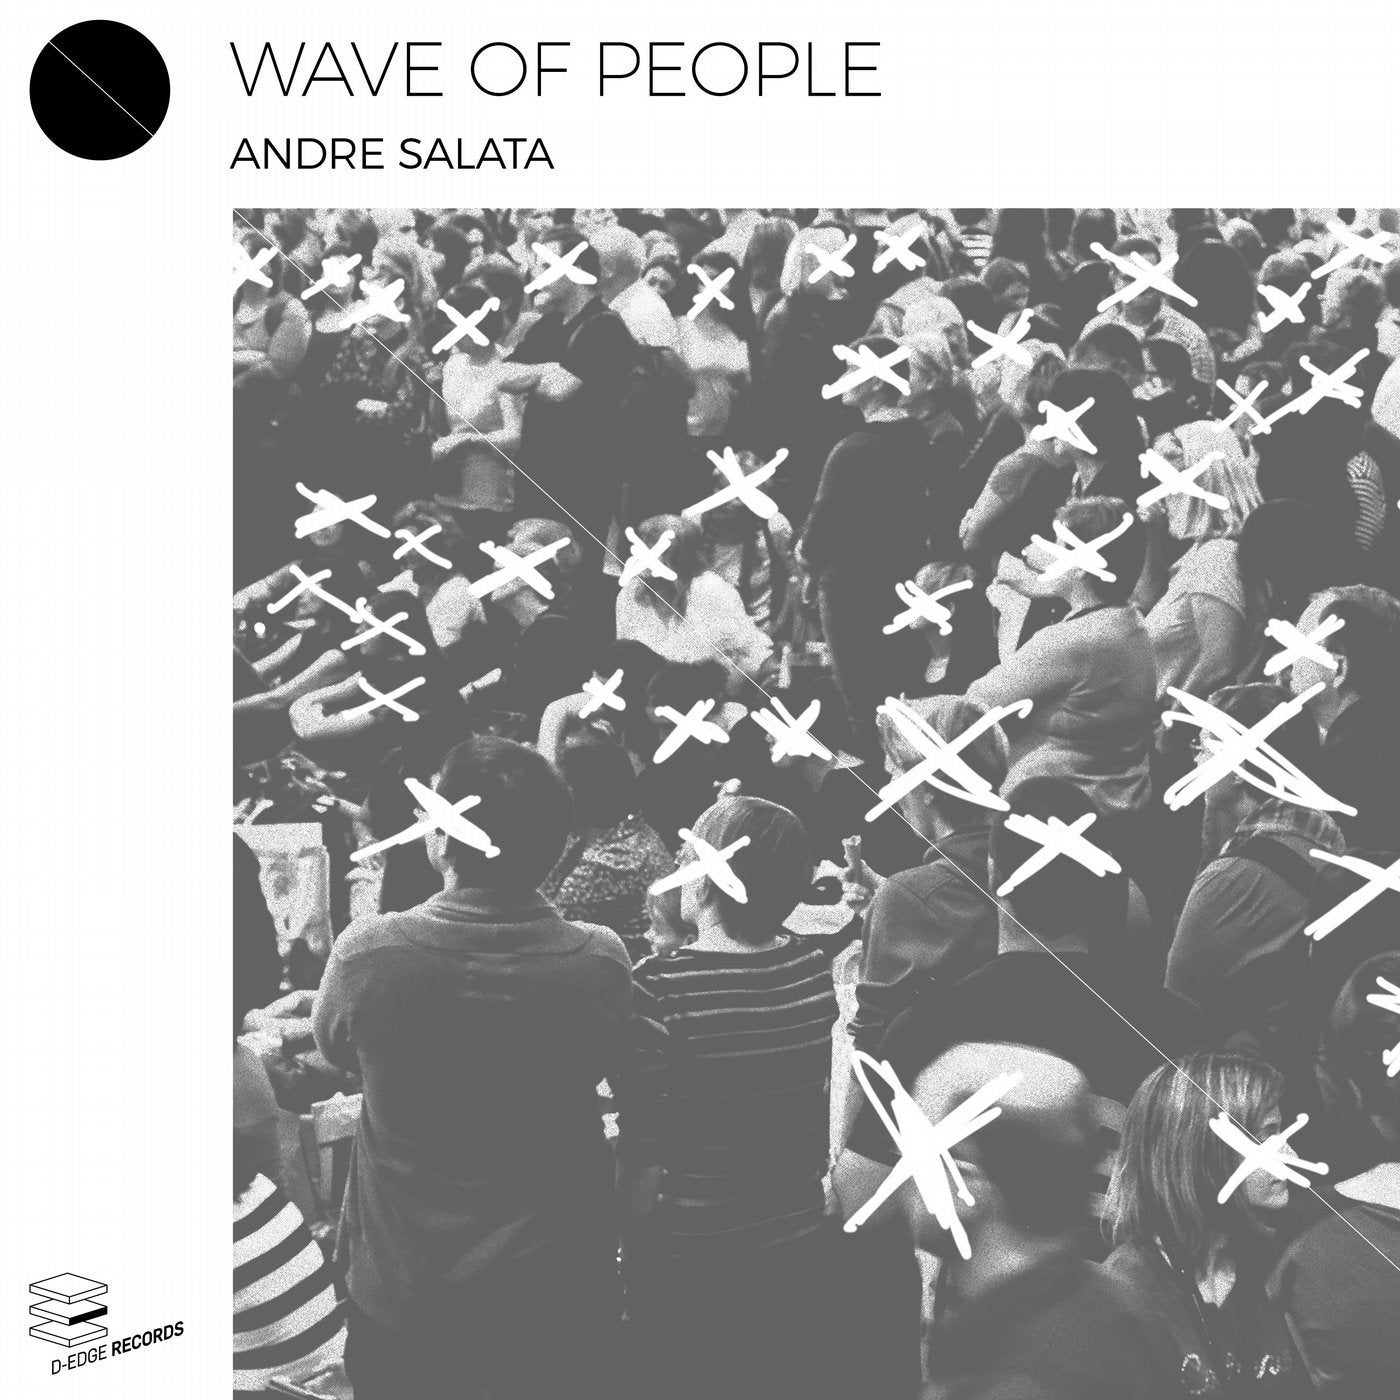 Wave of People